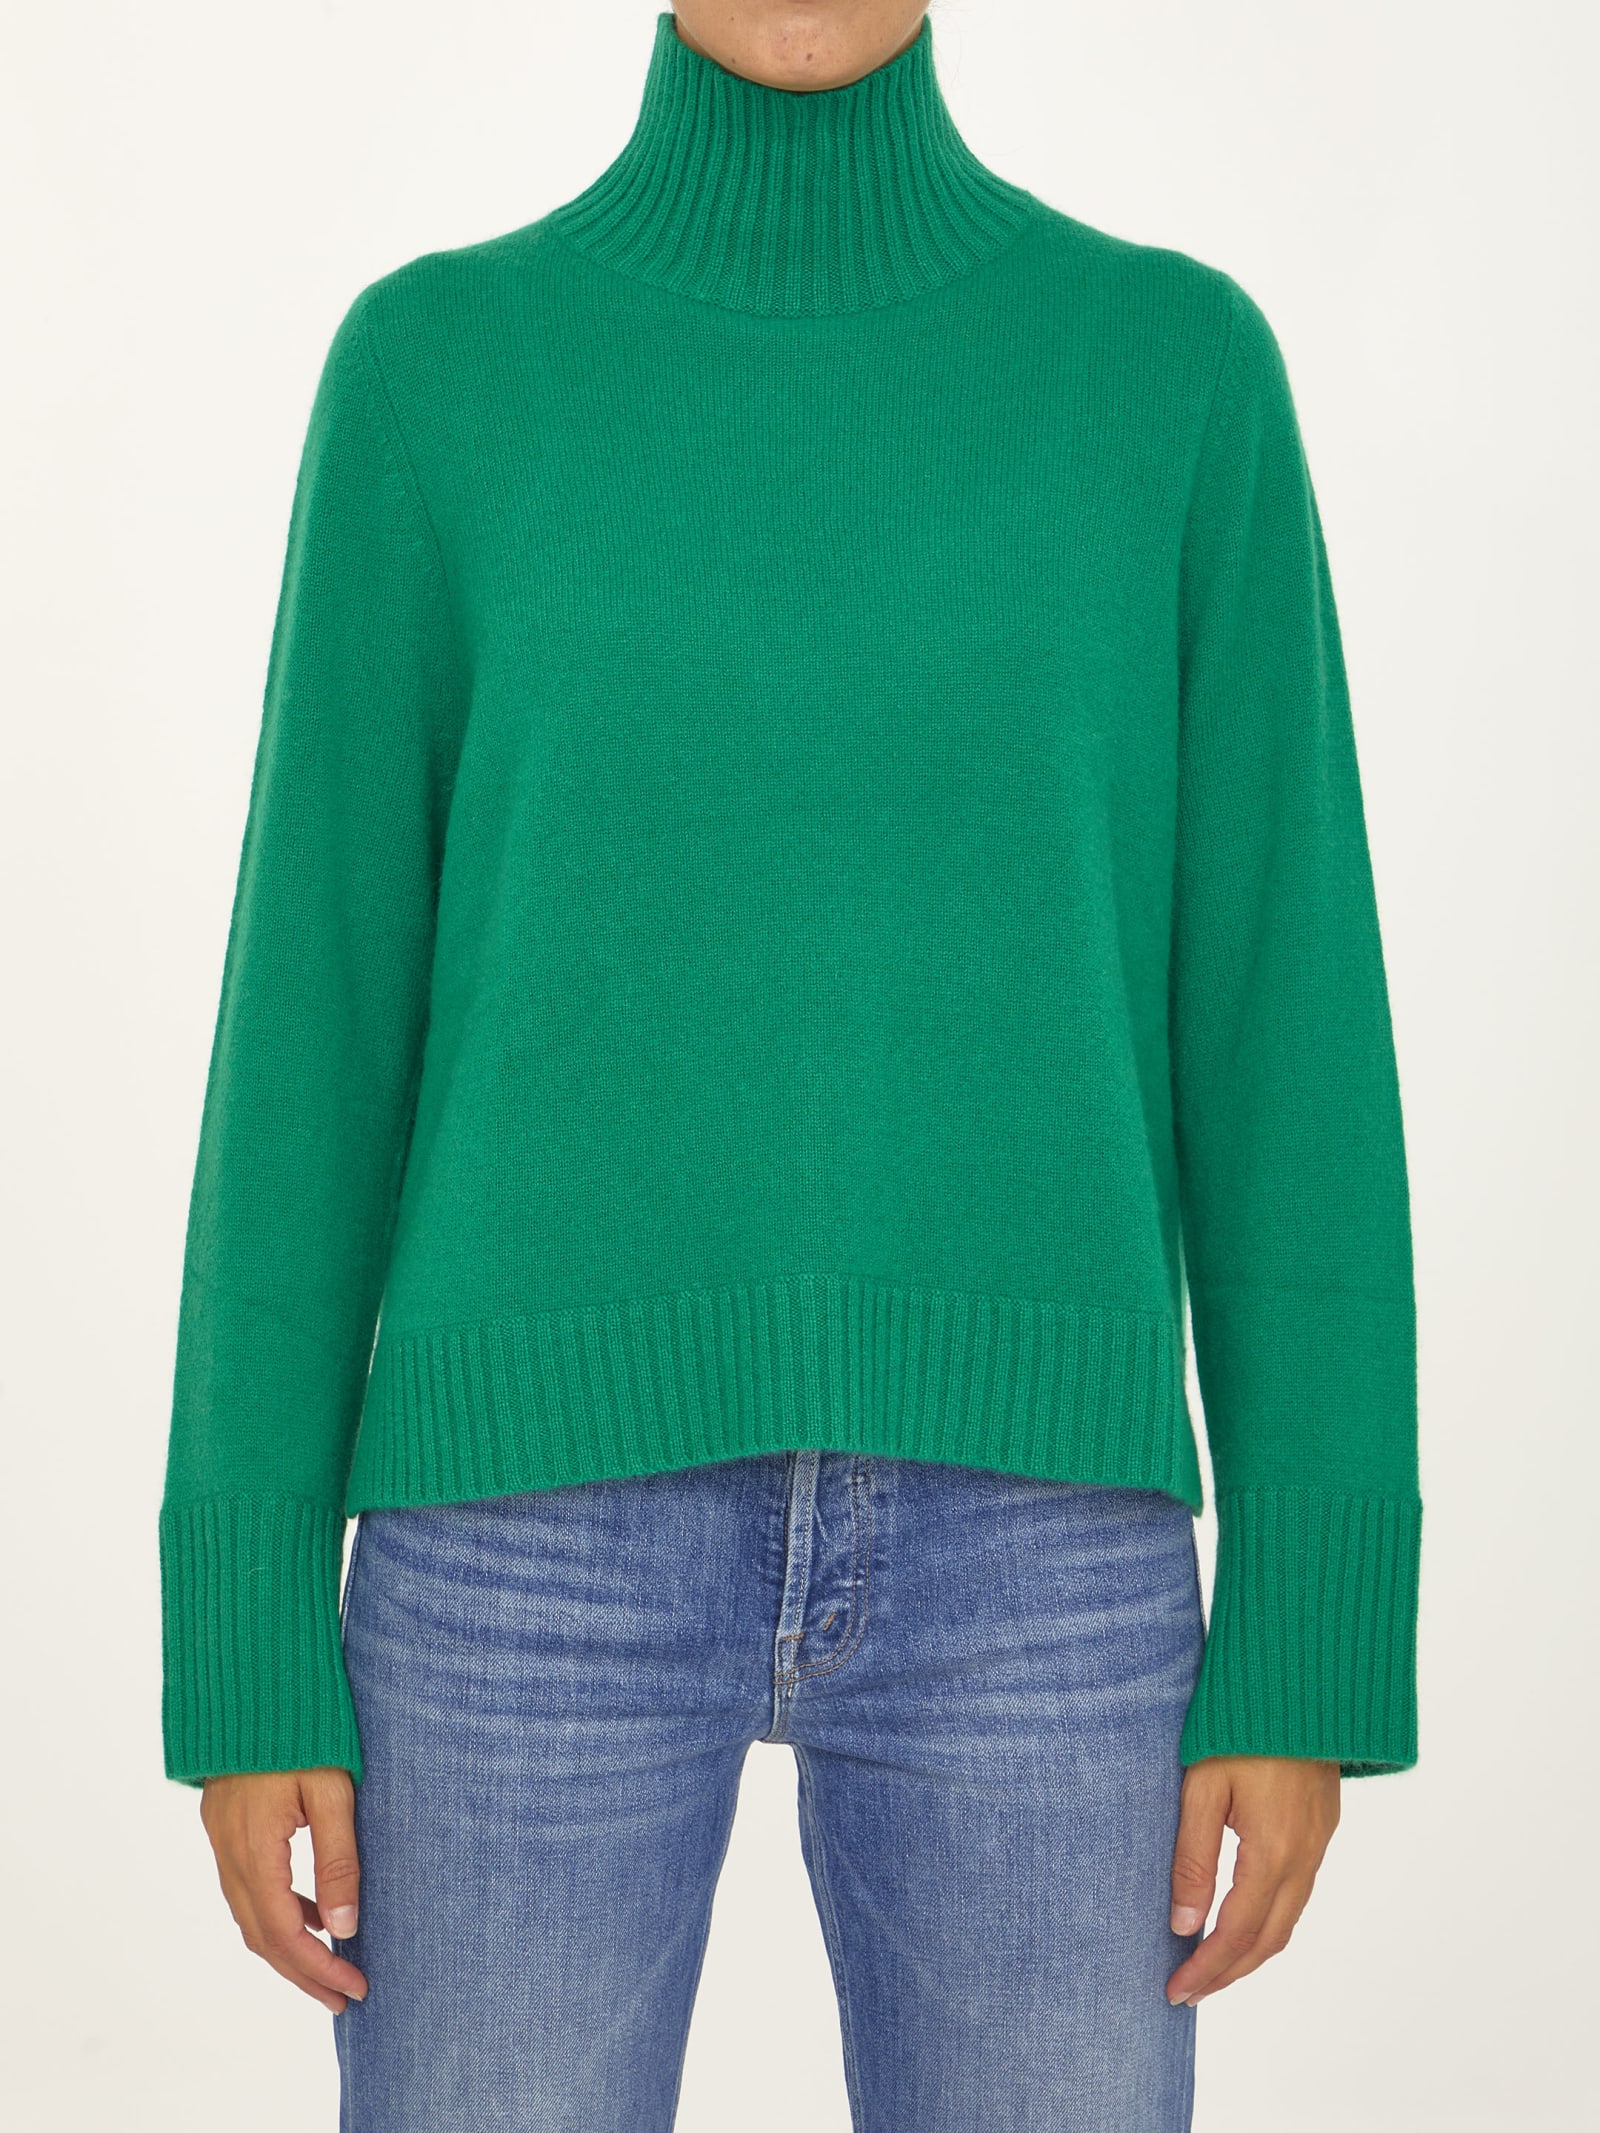 Allude Green Wool Cashmere Sweater